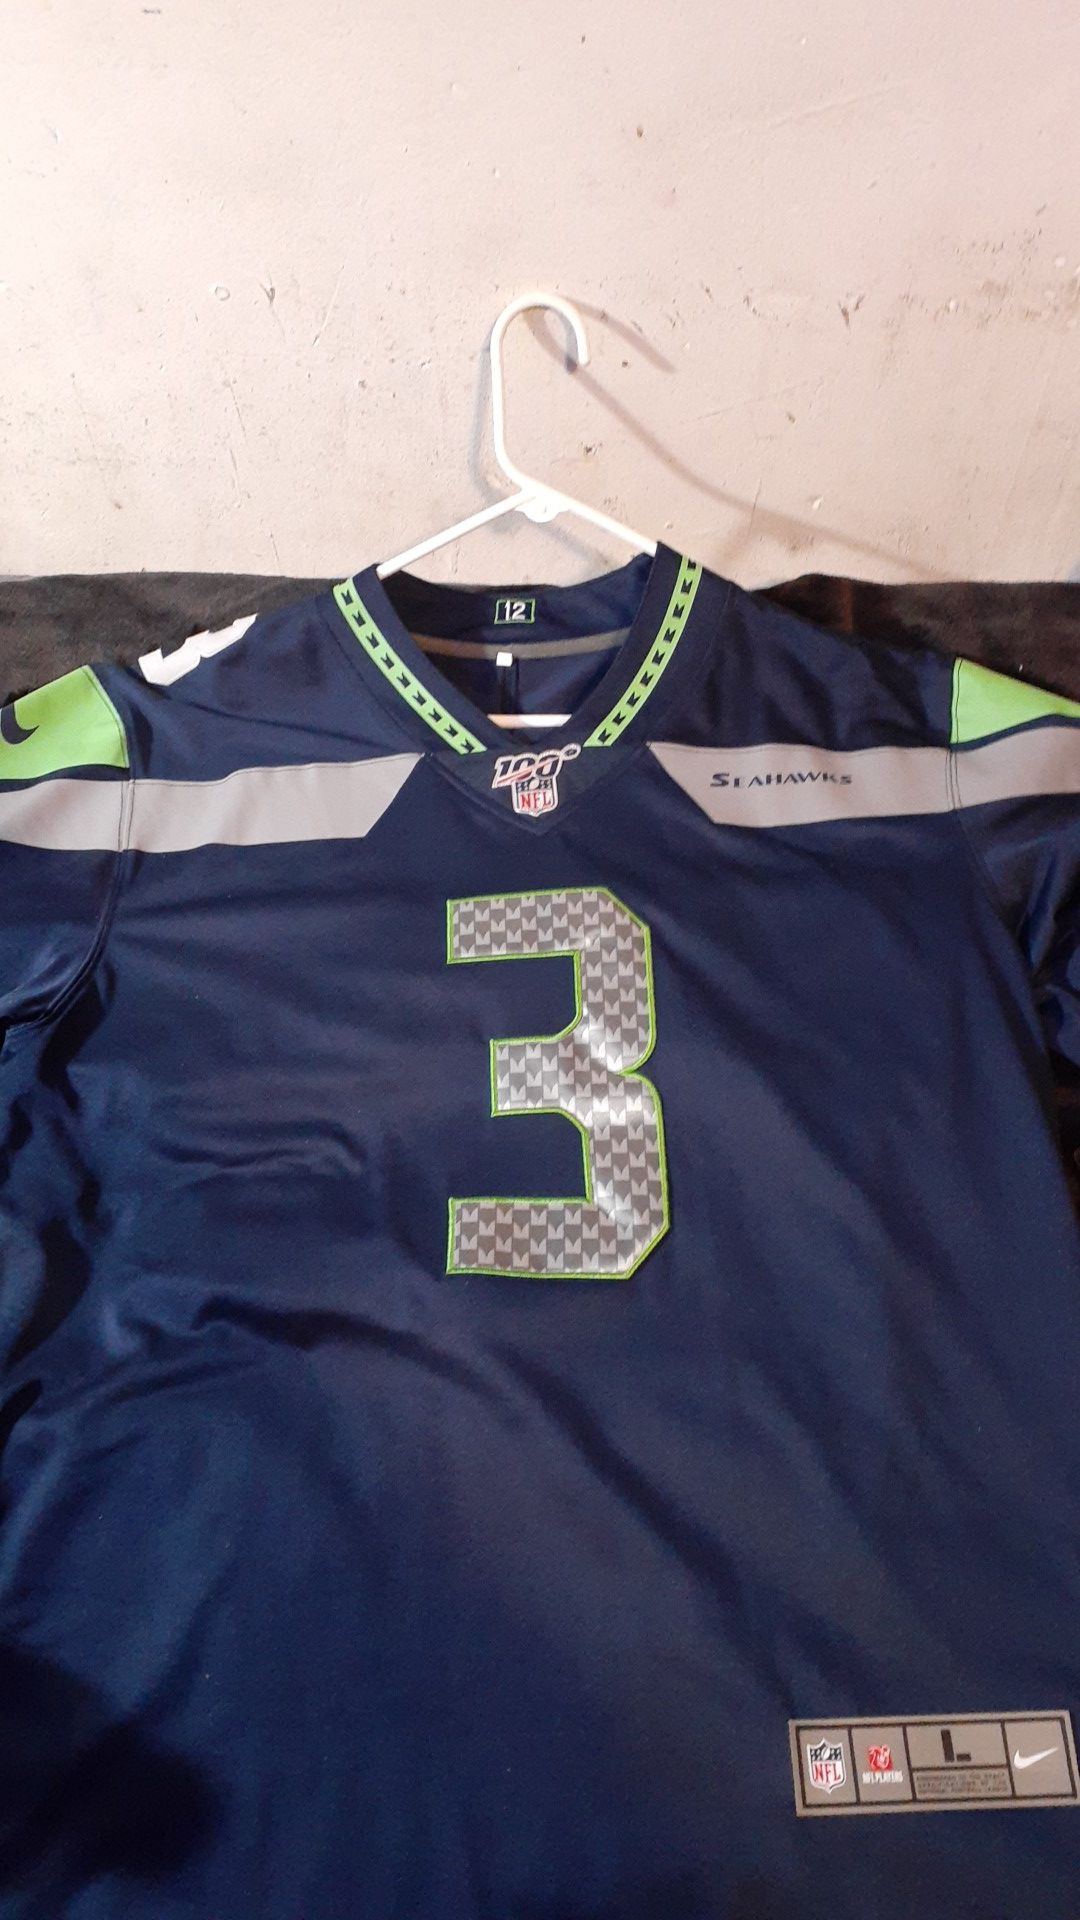 RUSSELL WILSON Nike NFL players official hundred year anniversary NFL Seahawks Russell Wilson Jersey size large never worn still has tags on it